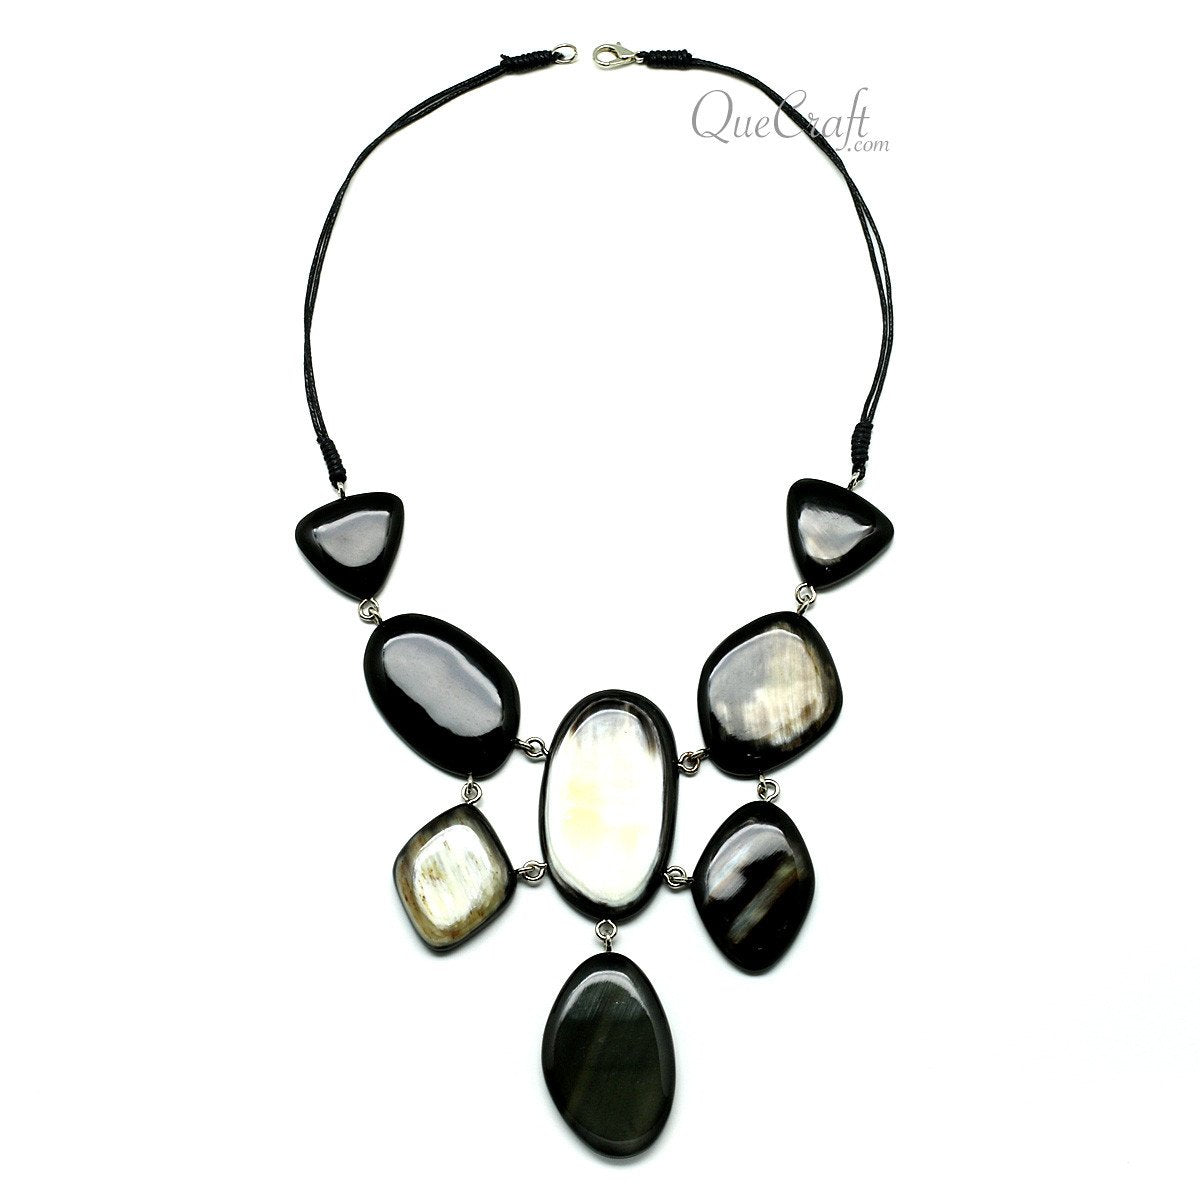 Horn String Necklace #11735 - HORN JEWELRY